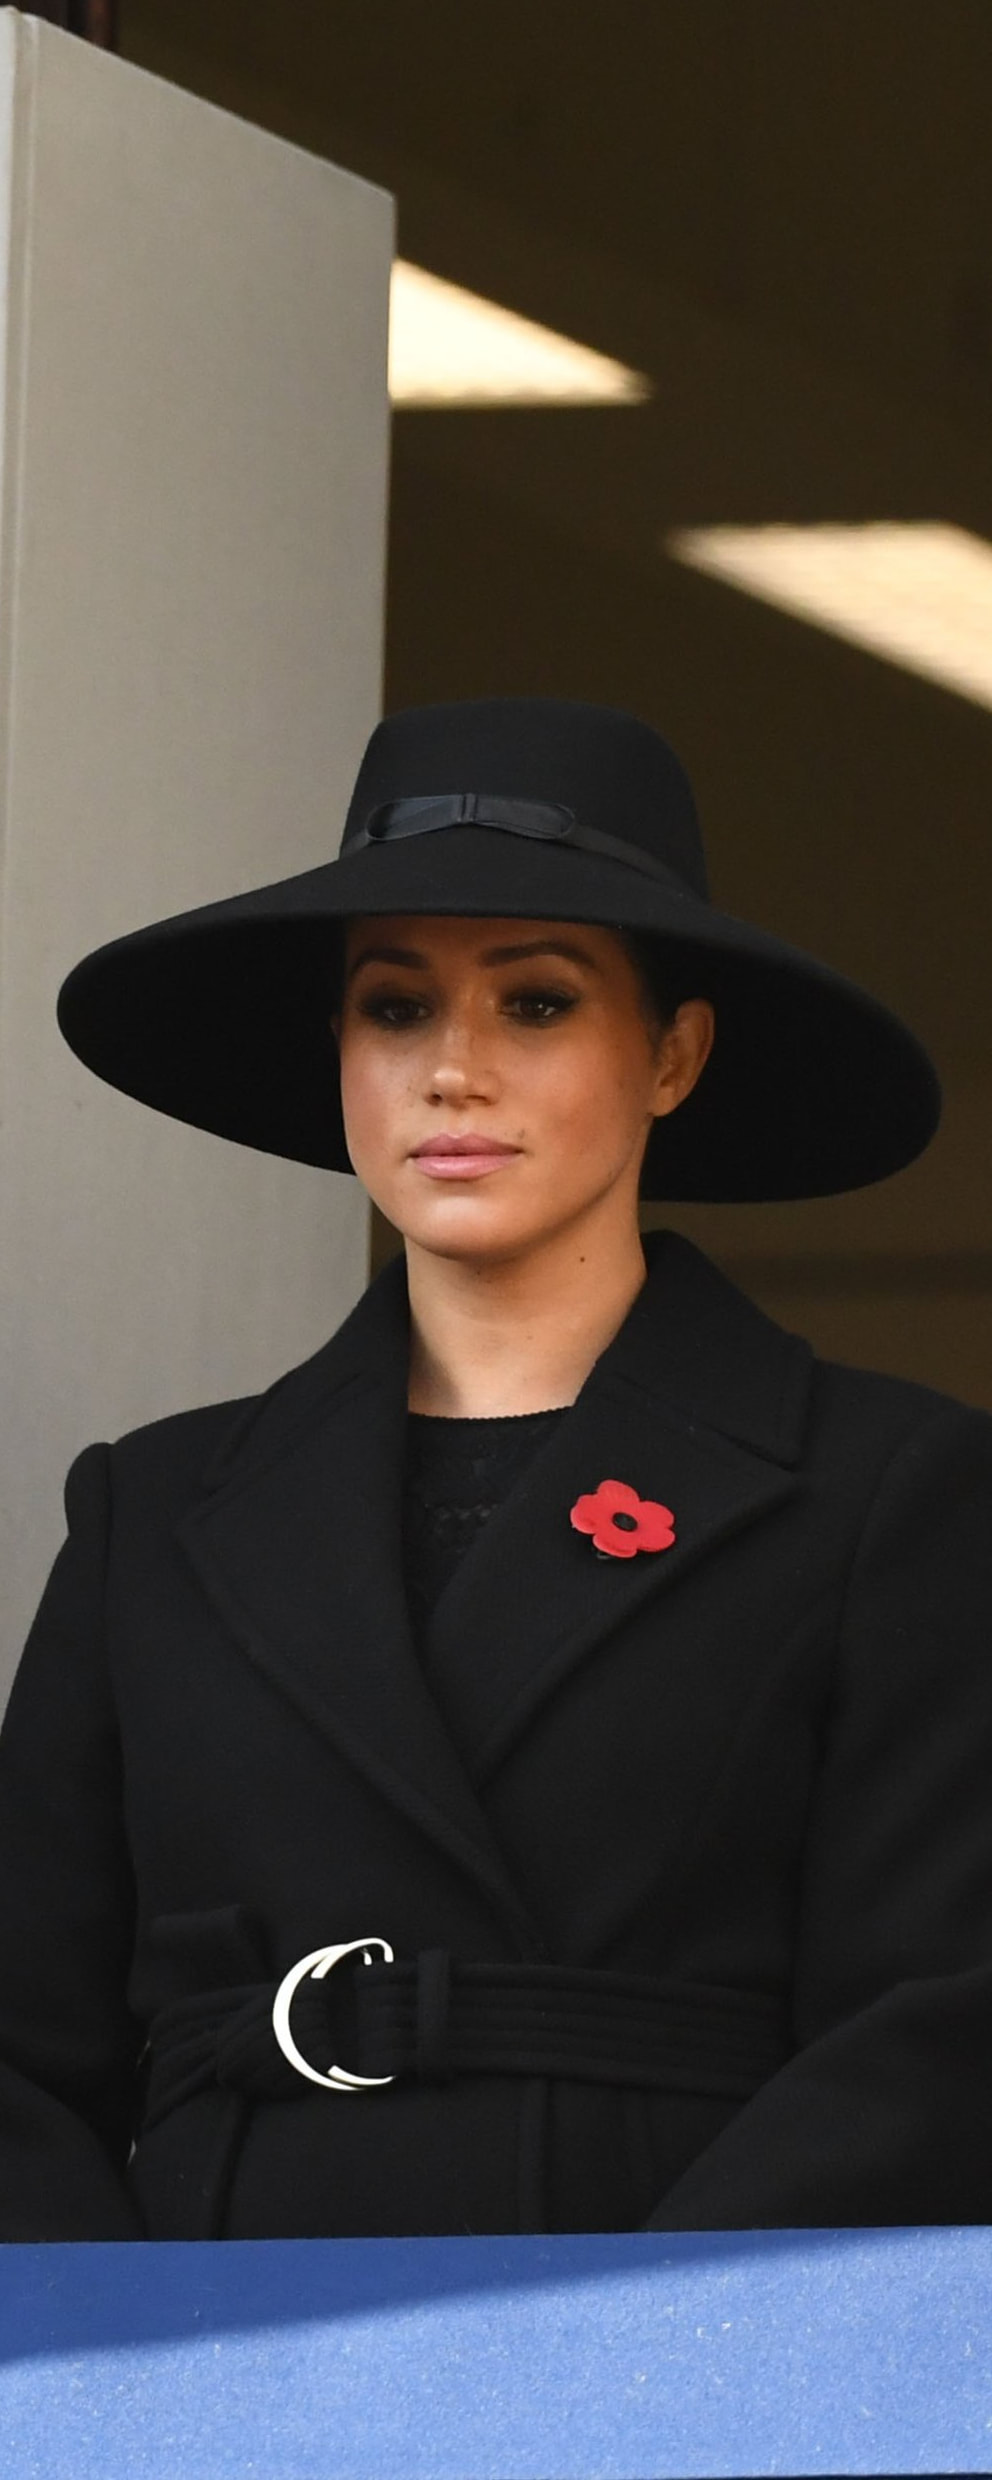 Stella McCartney Black Double-Breasted Wool Coat as seen on Meghan Markle, the Duchess of Sussex